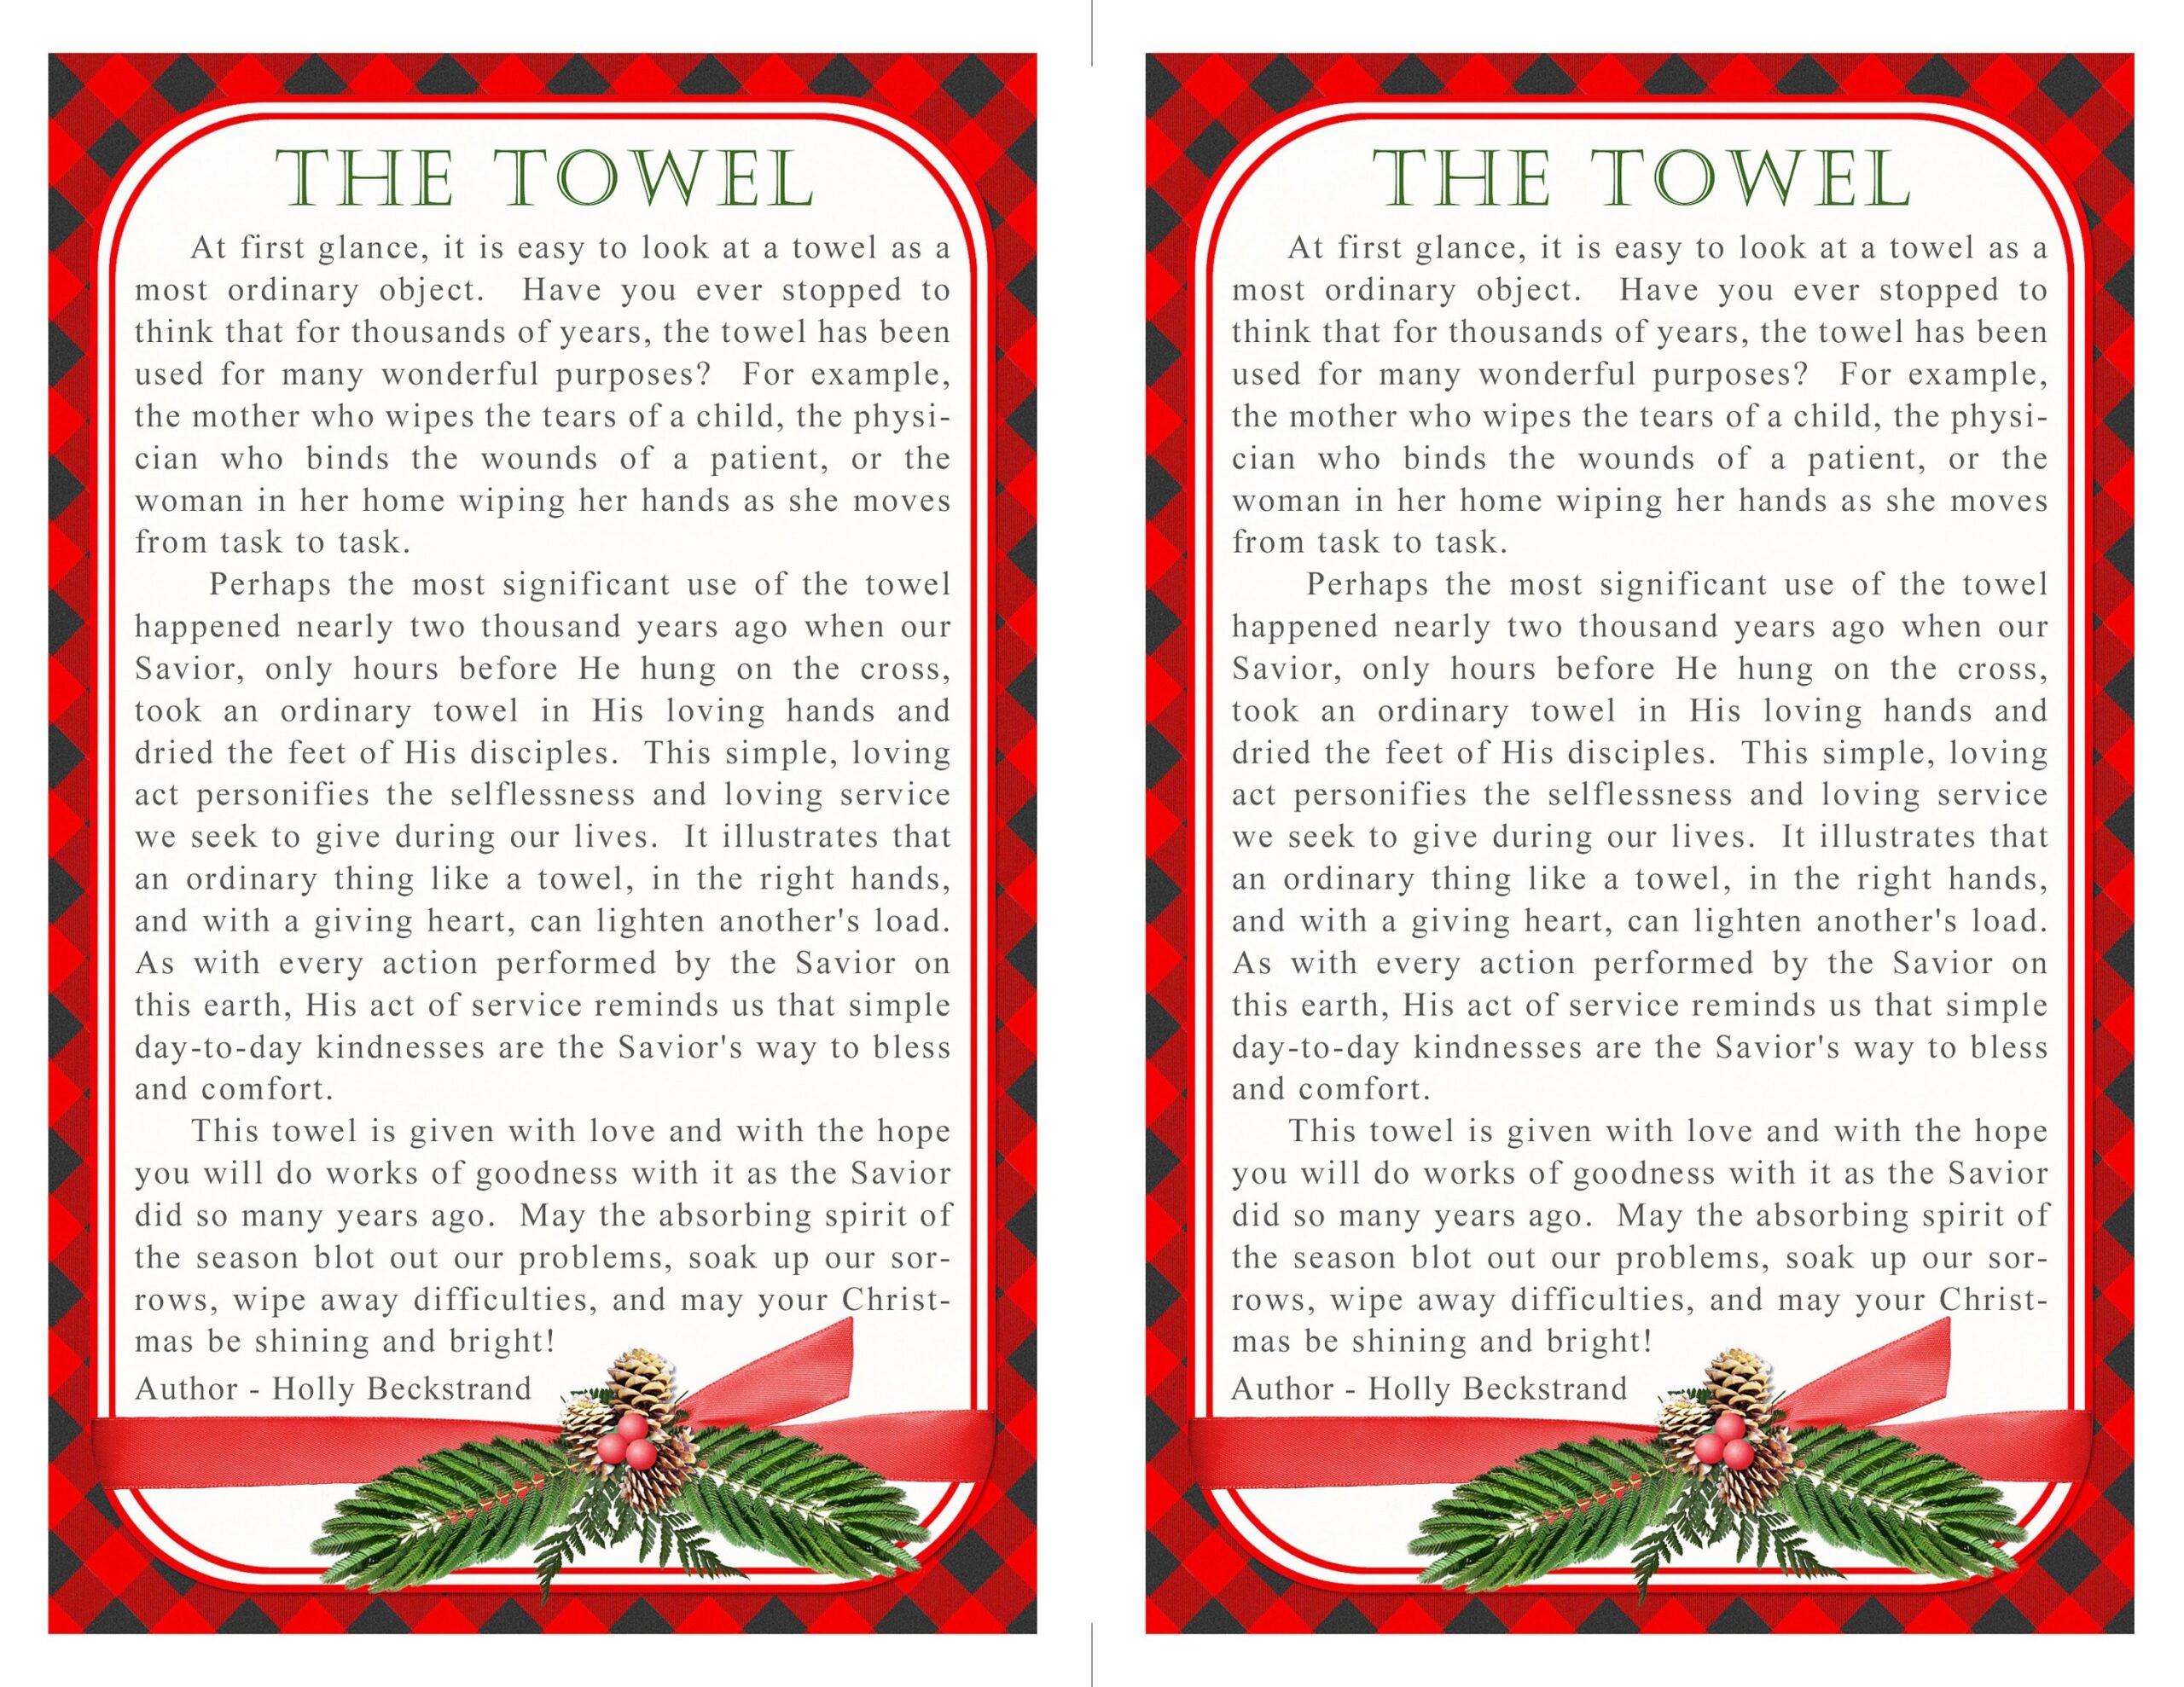 Christmas Towel Story In A Red Buffalo Plaid Design Christmas Gift Instant Download Printable Christmas Story Jesus Christ Towel Story Etsy